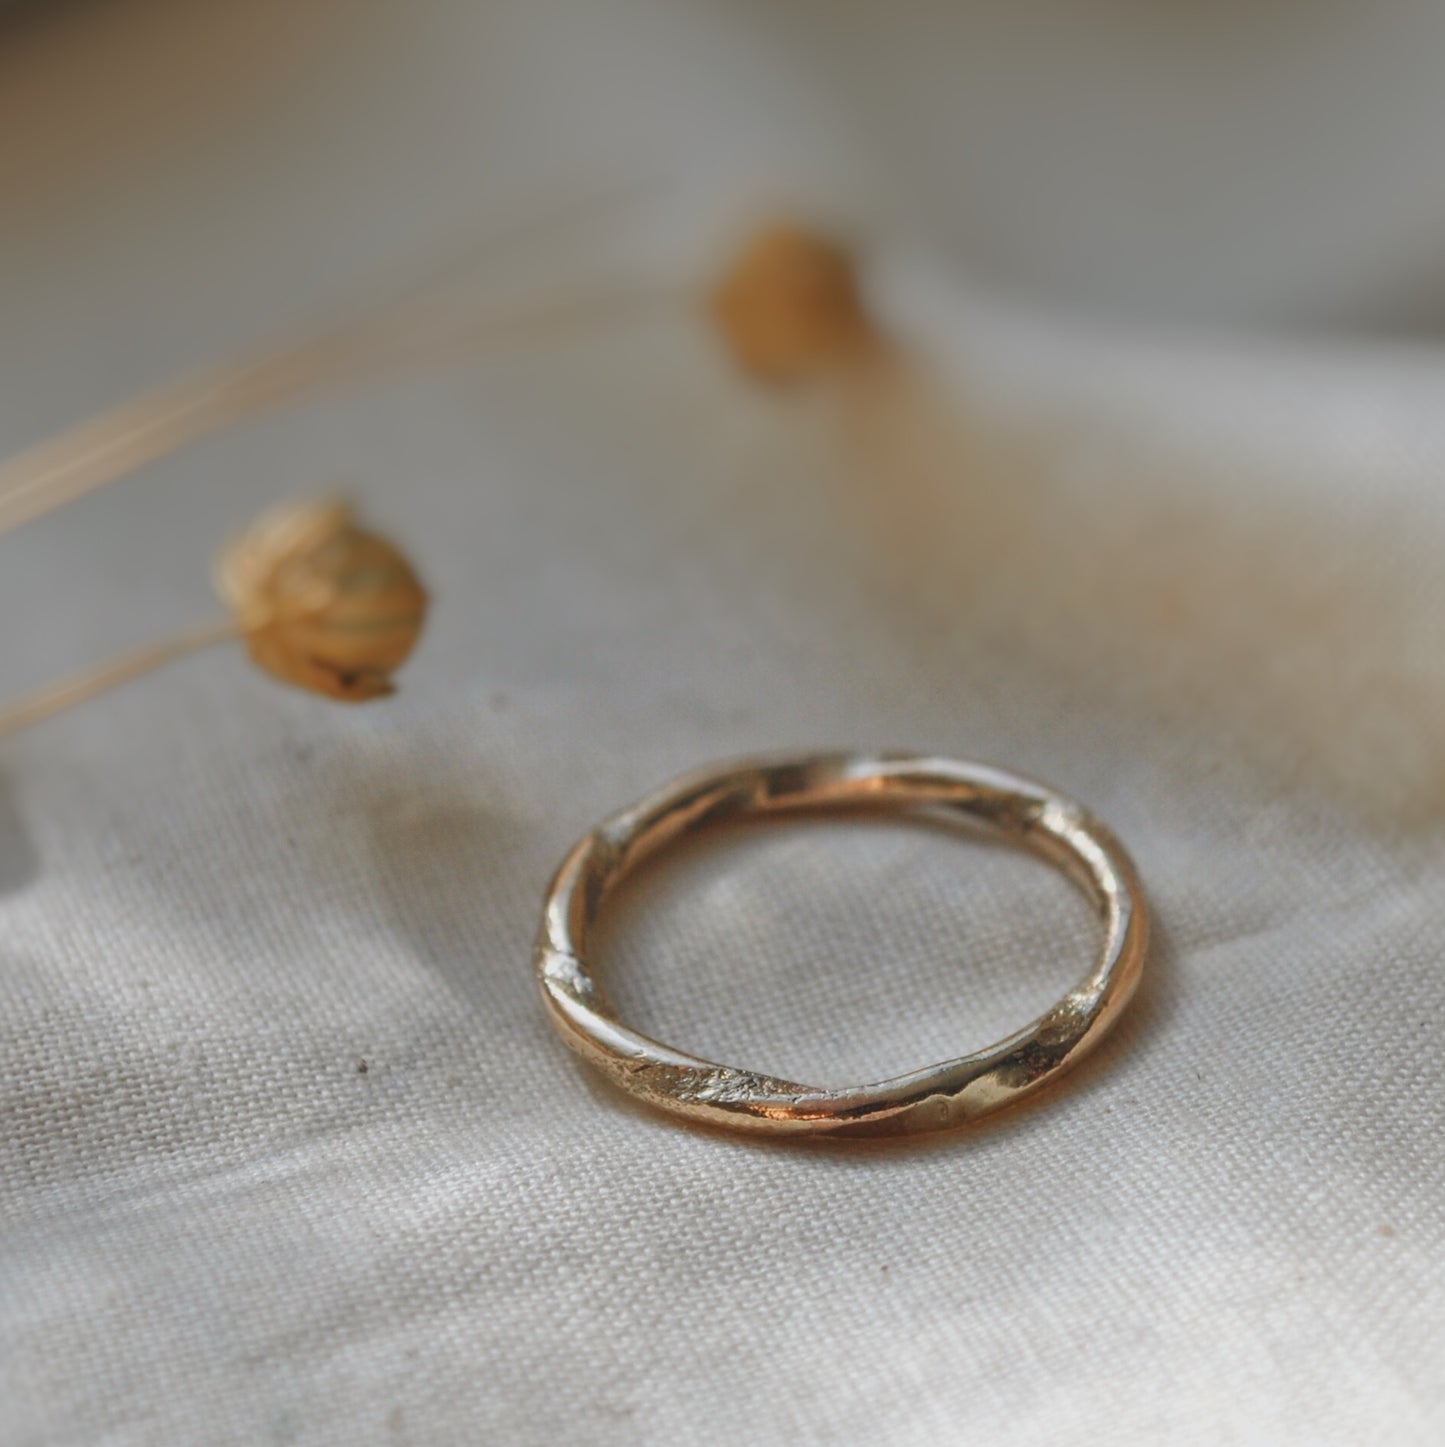 A handmade gold wedding band with textured twist detail, laying on soft natural linen